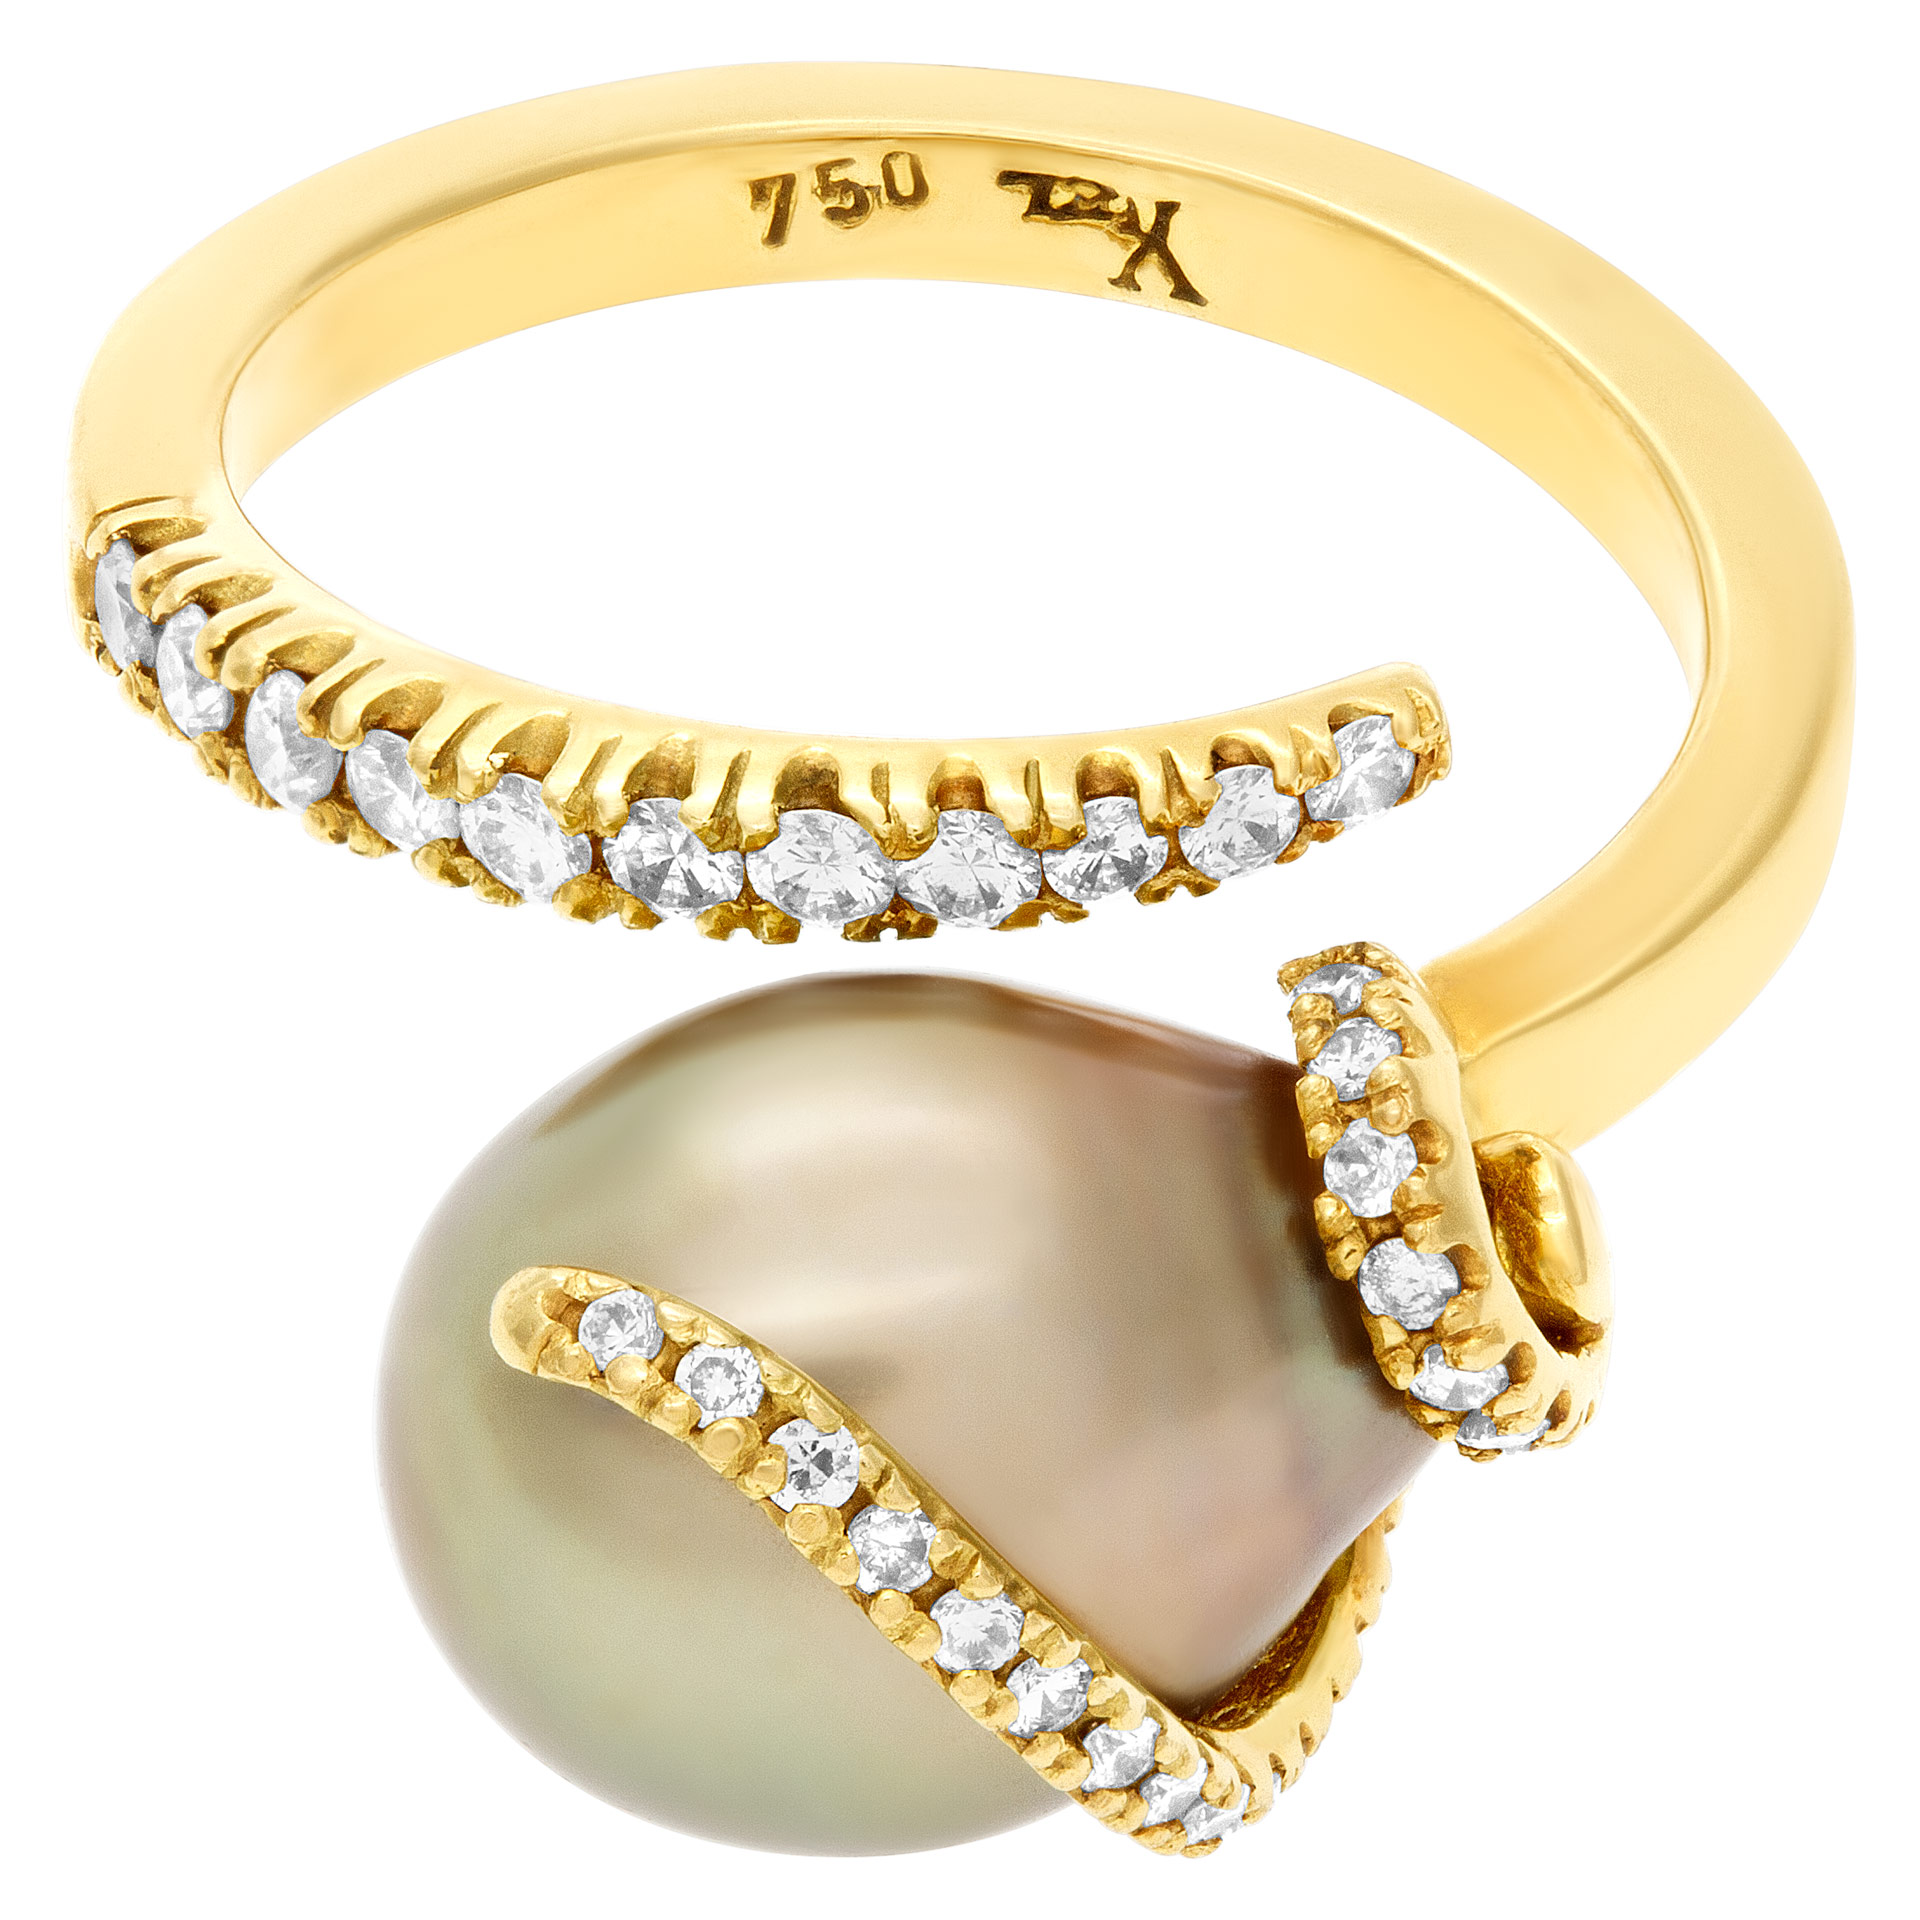 South Sea pearl ring with diamond accents in 18k gold image 1